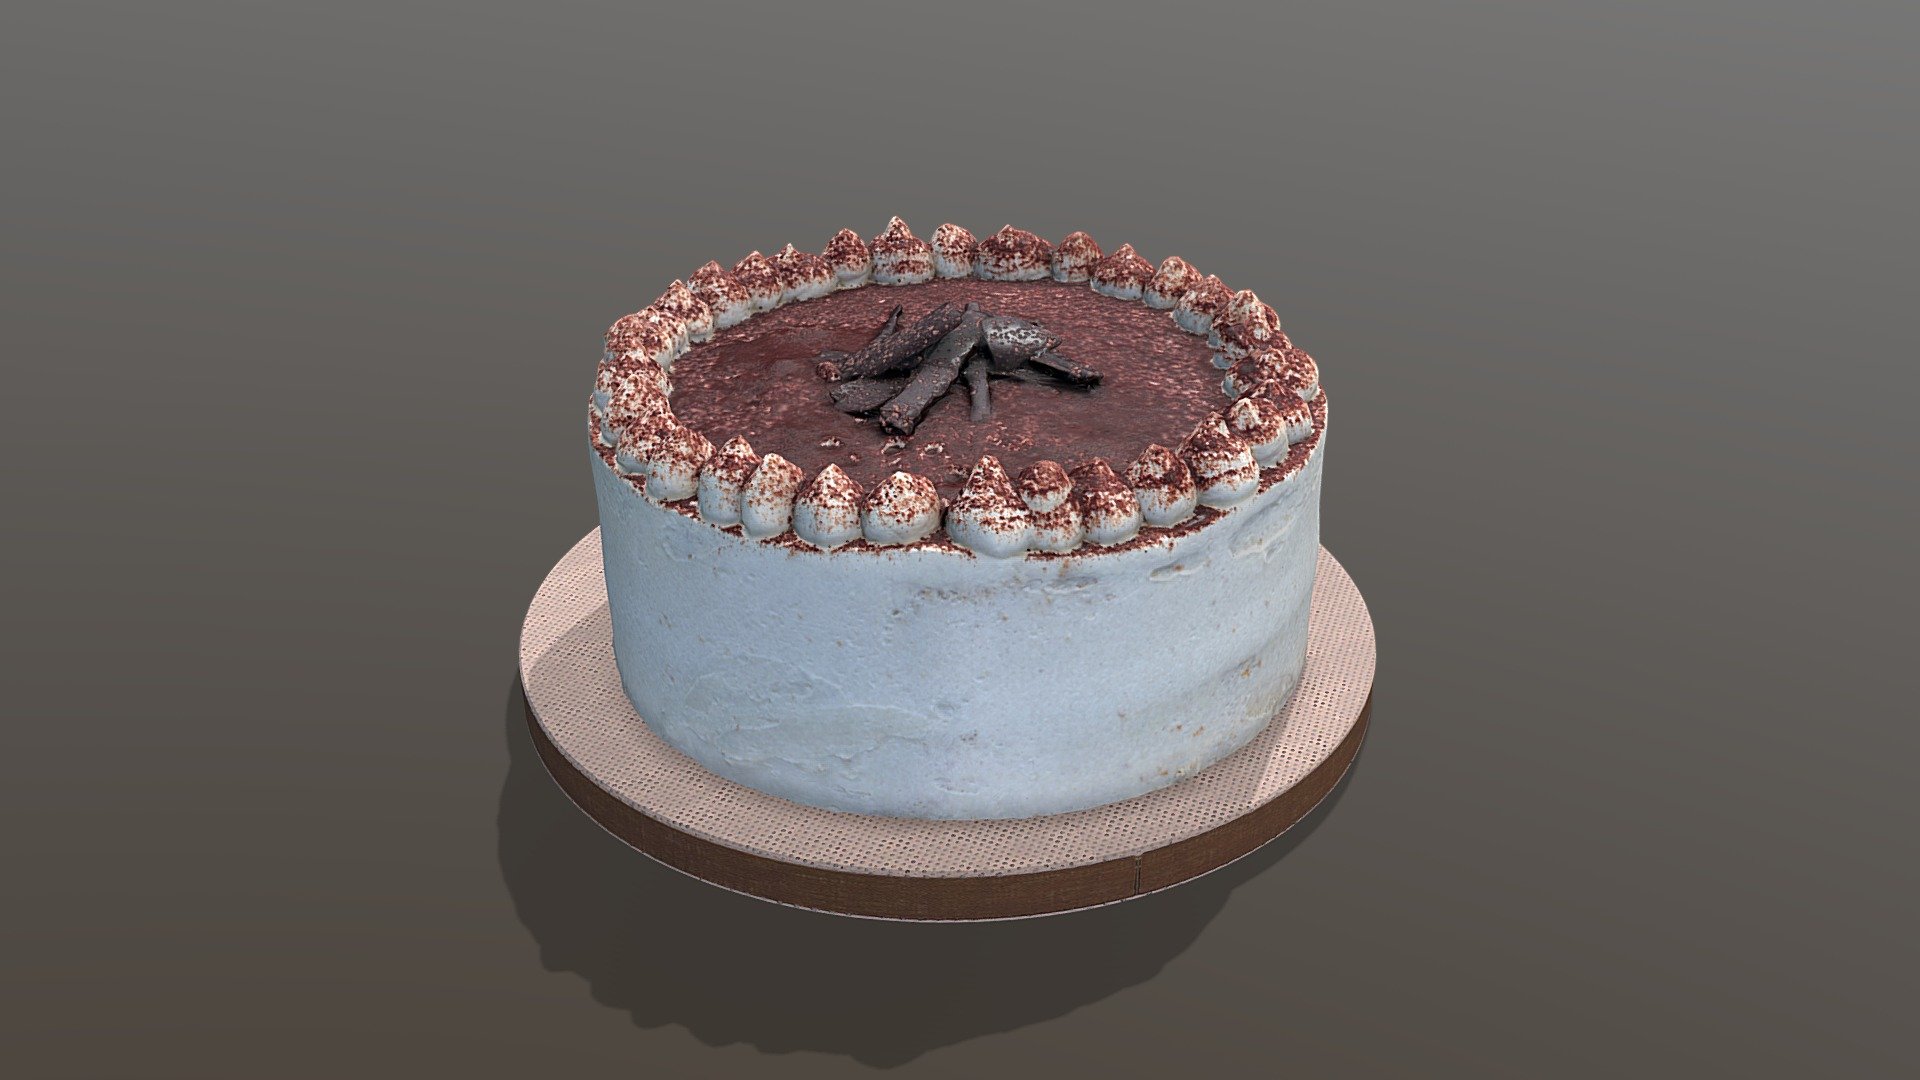 This premium Tiramisu Cake model was created using photogrammetry which is made by CAKESBURG Premium Cake Shop in the UK. You can purchase real cake from this link: https://cakesburg.co.uk/products/tiramisu-cake?_pos=1&amp;_sid=0bbd641ba&amp;_ss=r

Textures 4096*4096px PBR photoscan-based materials Base Color, Normal, Roughness, Specular)

Click here for the cut &amp; Slice version.

Click here for a slice of cake version 3d model